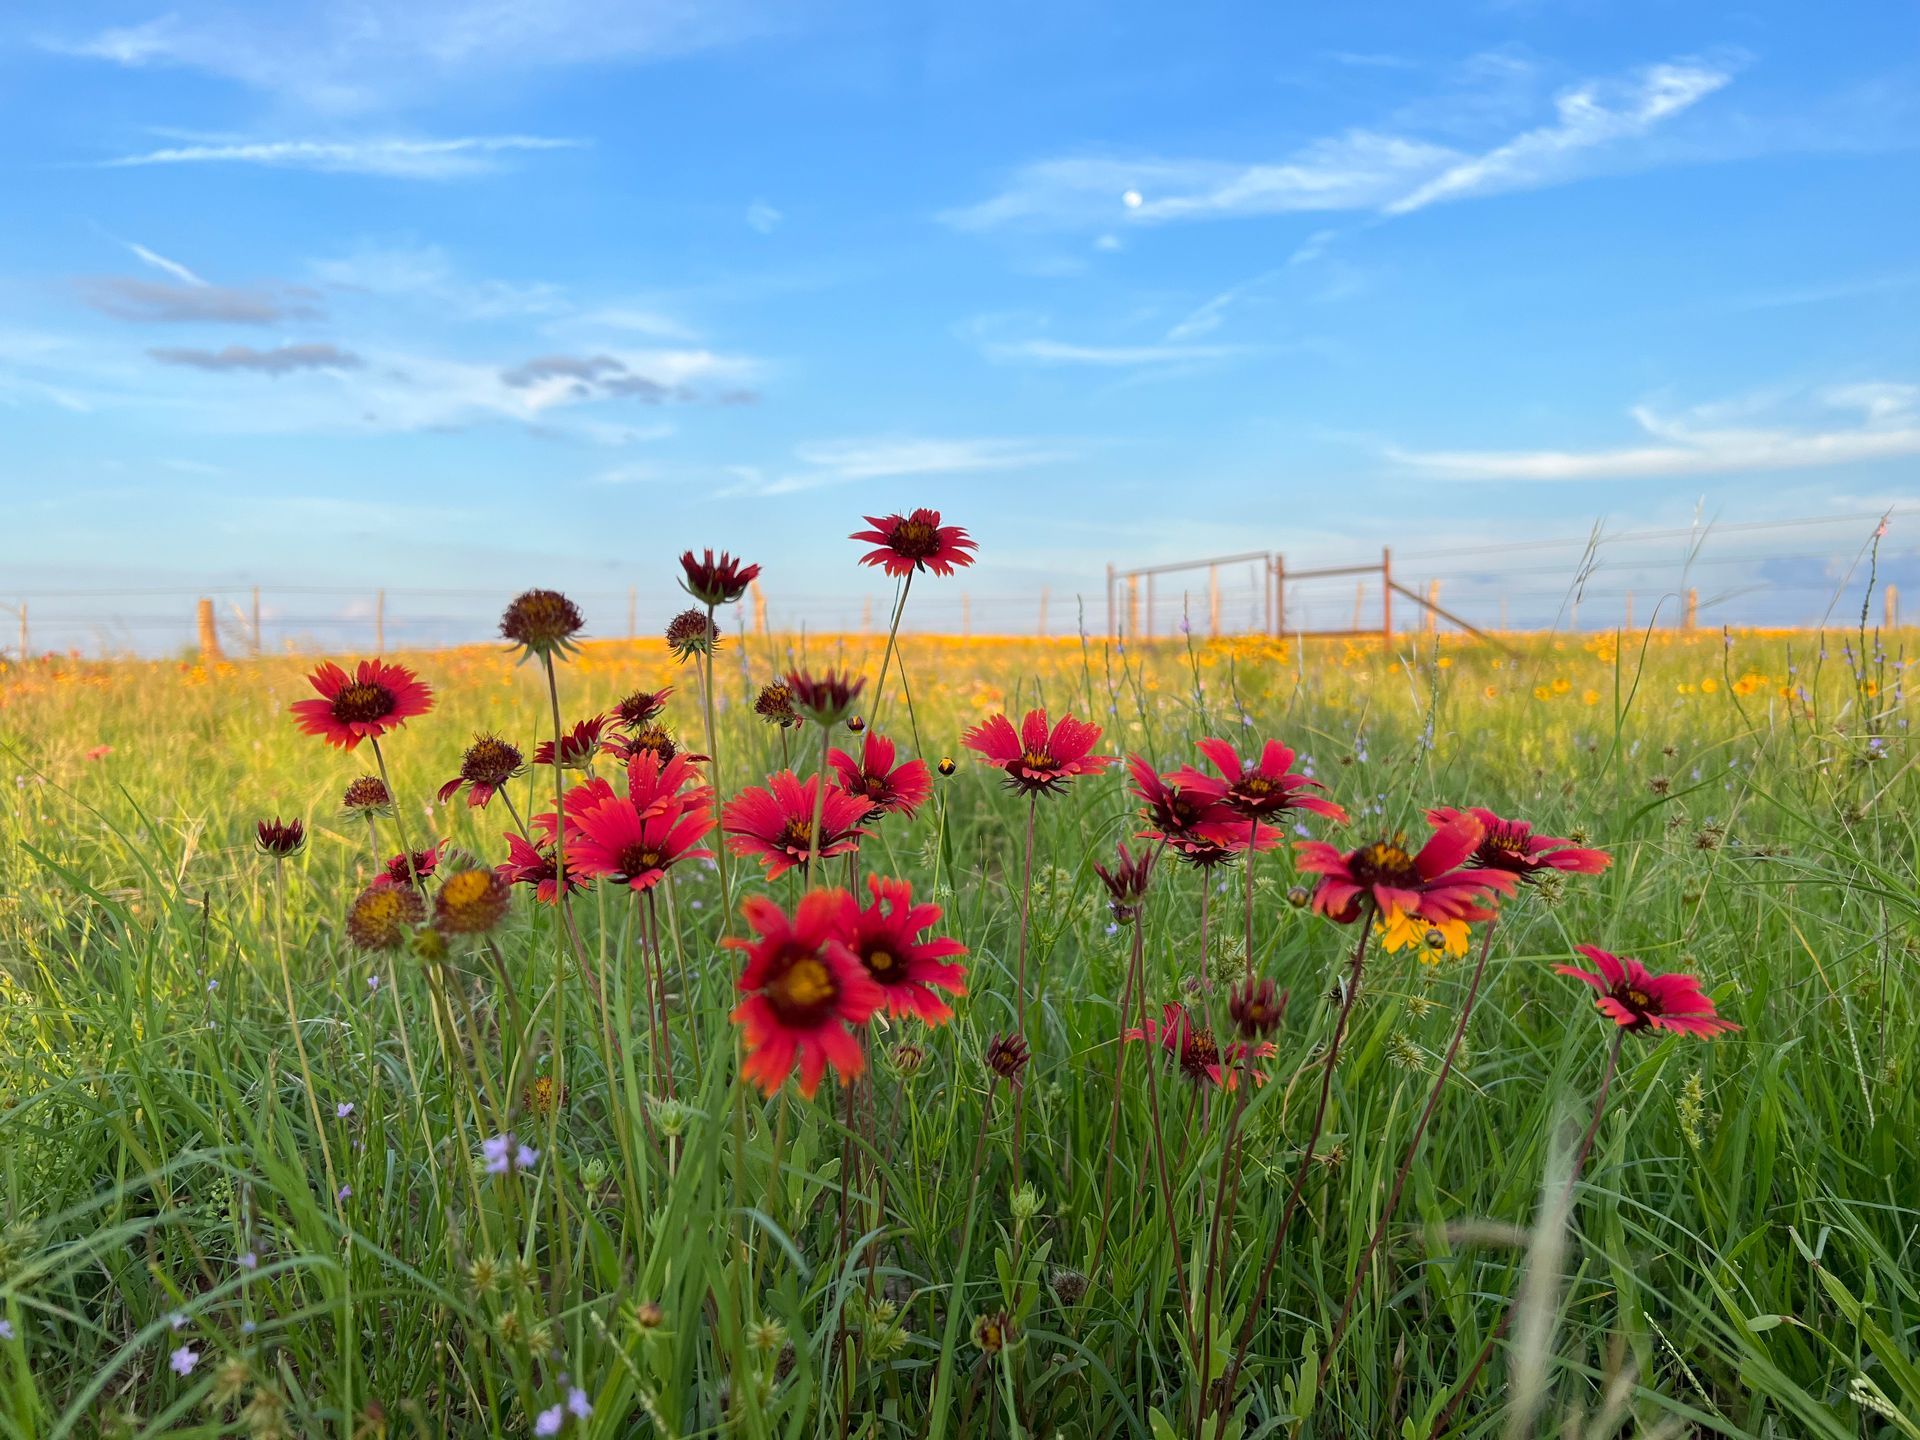 a field of red and yellow flowers with a fence in the background .